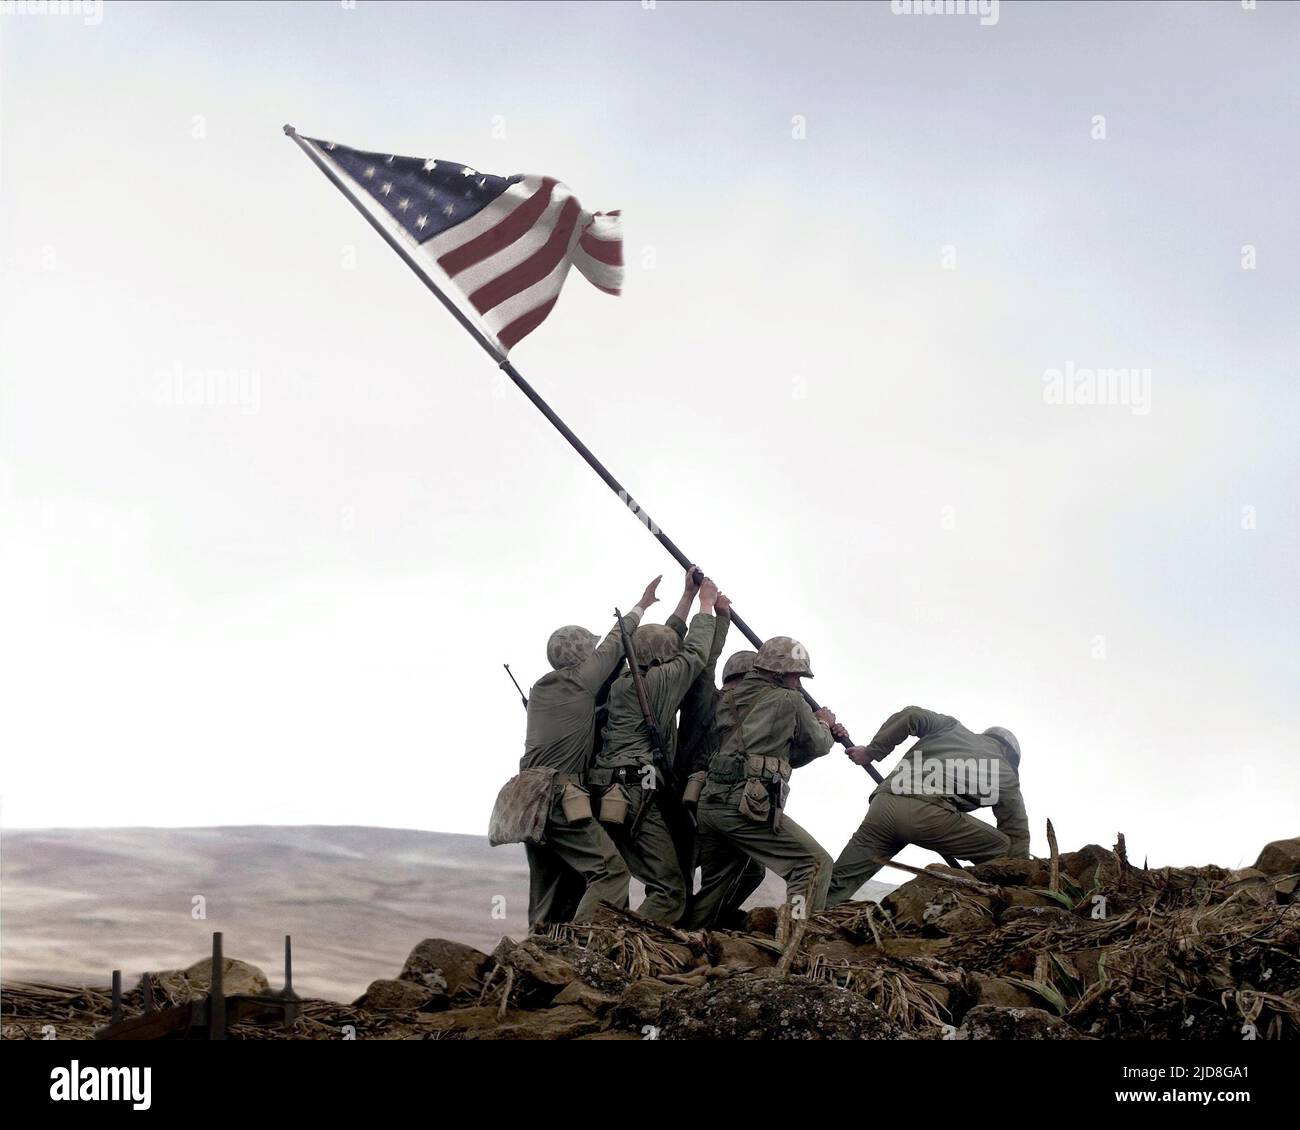 RAISING OF THE AMERICAN FLAG, FLAGS OF OUR FATHERS, 2006, Stock Photo